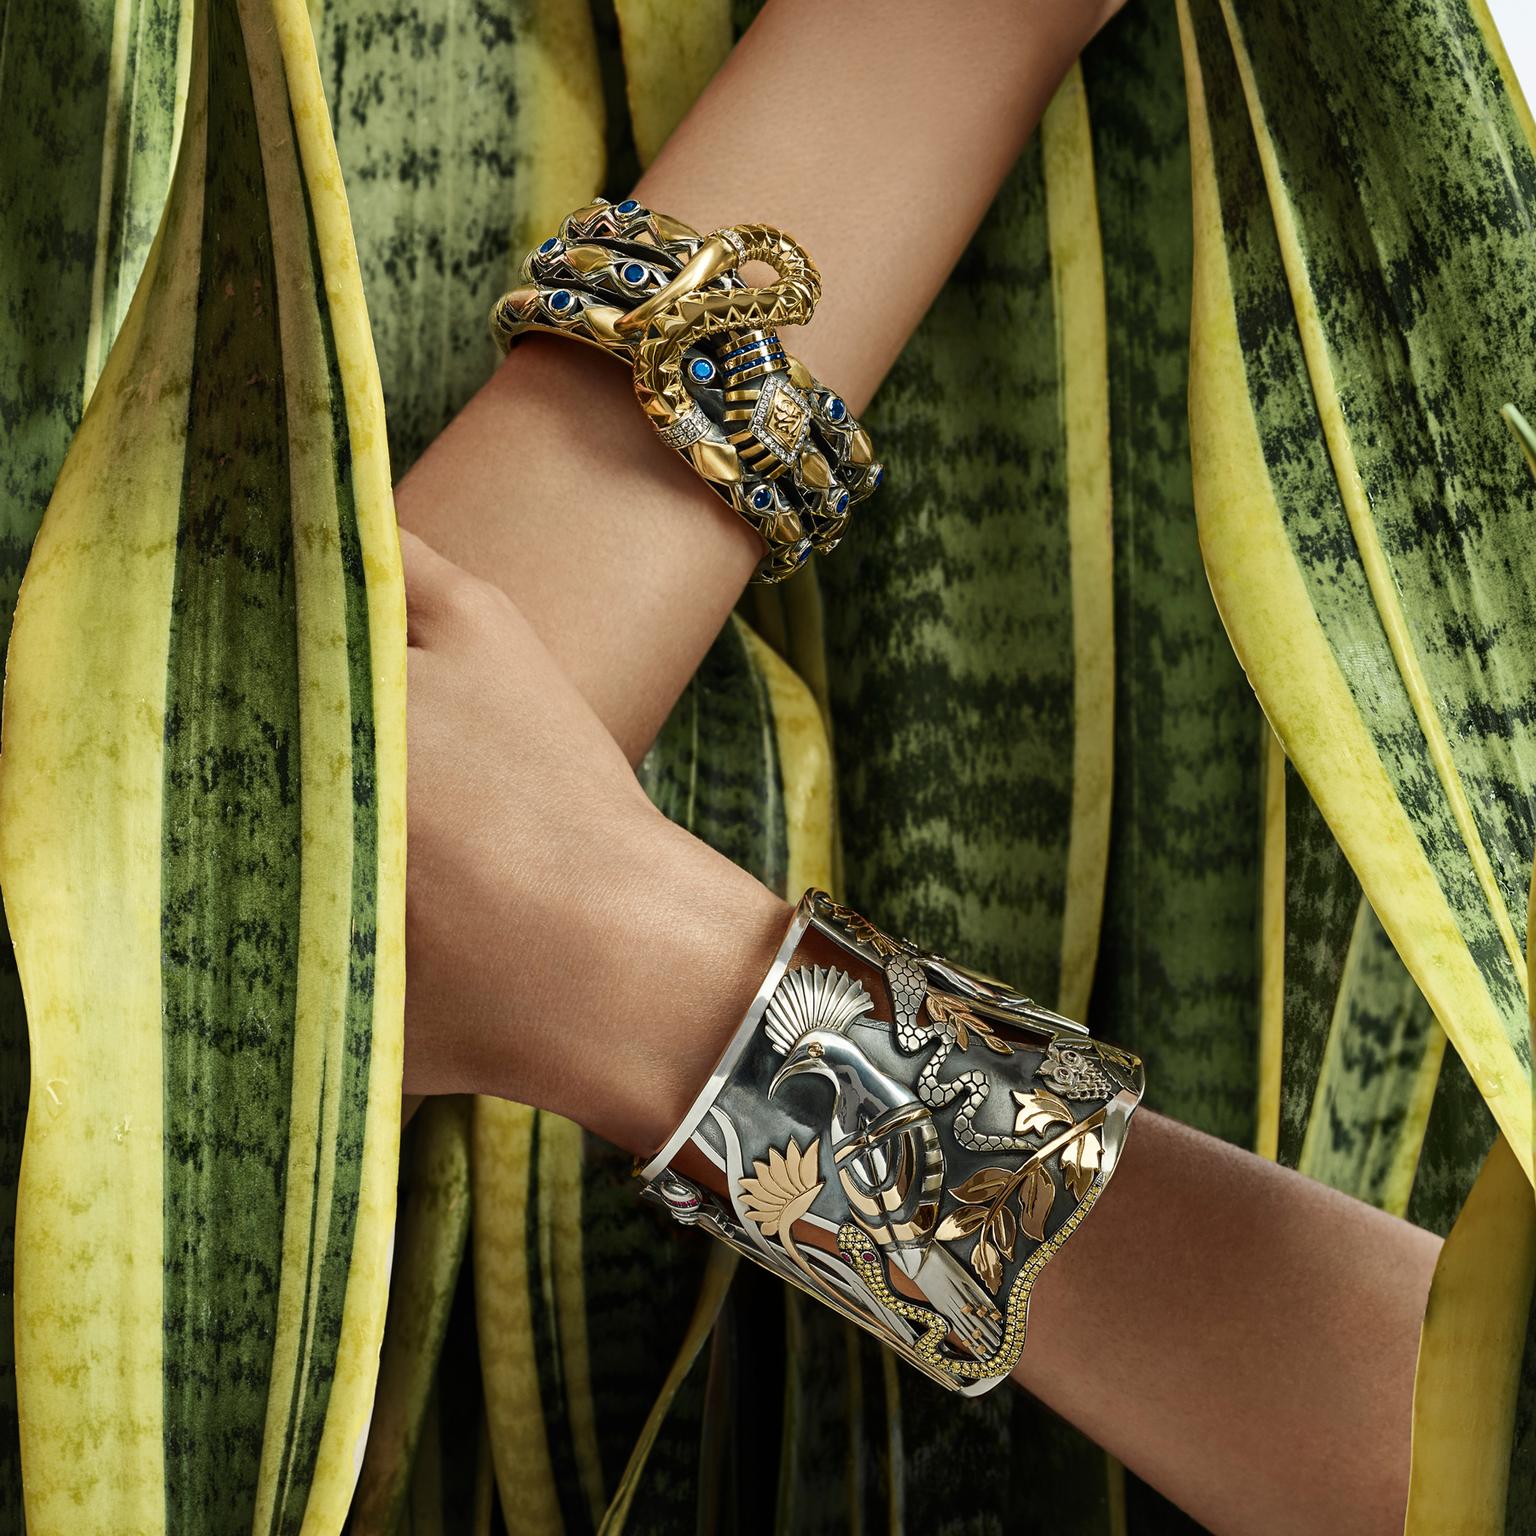 Azza Fahmy's new 'Falahy' collection draws fresh inspiration from rural  Egypt - Style - Life & Style - Ahram Online